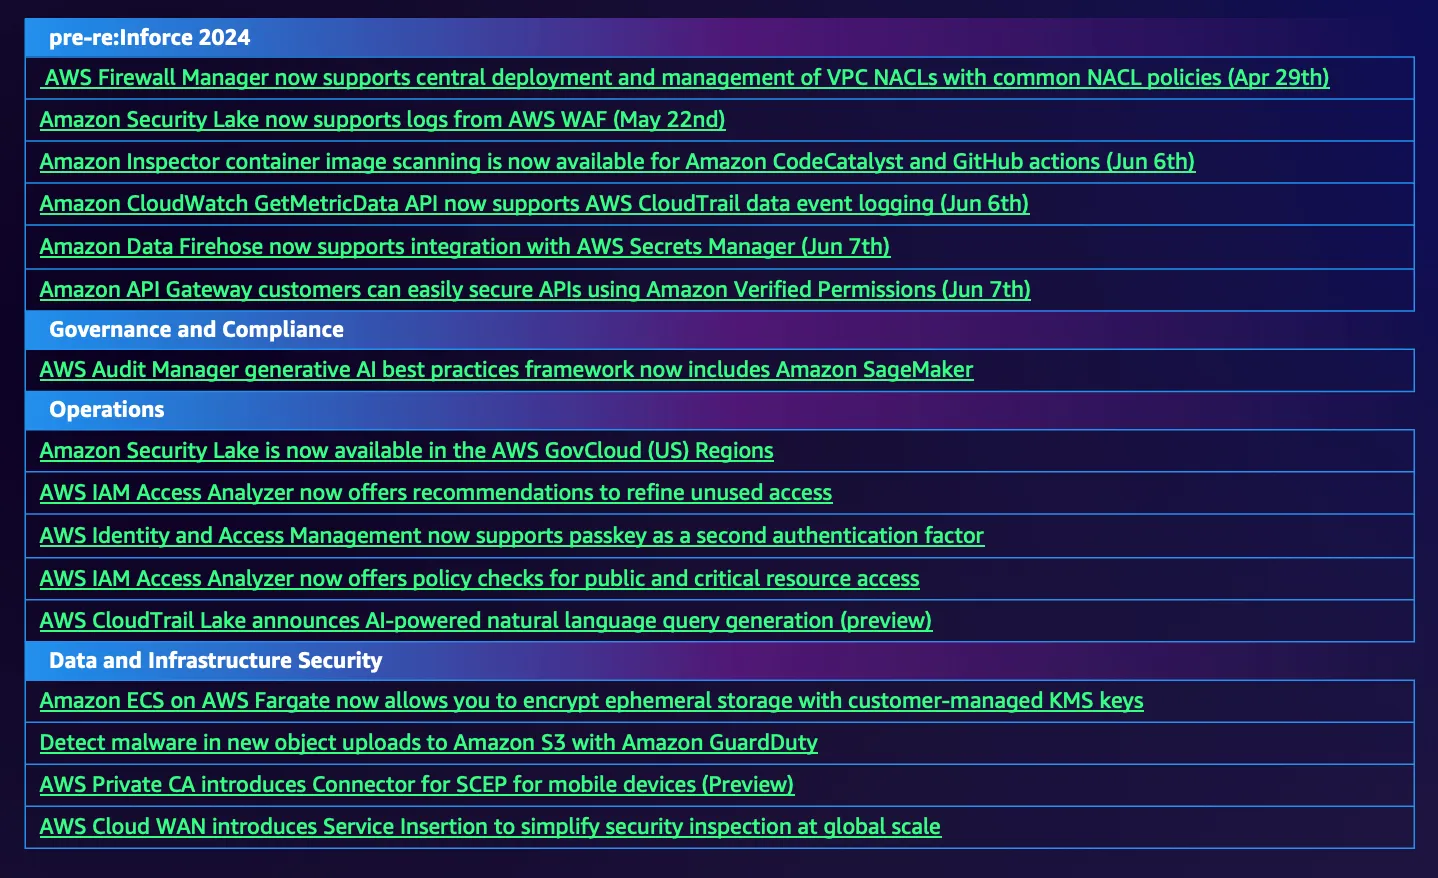 A complete list of announcements from AWS re:Inforce 2024 (and right before).